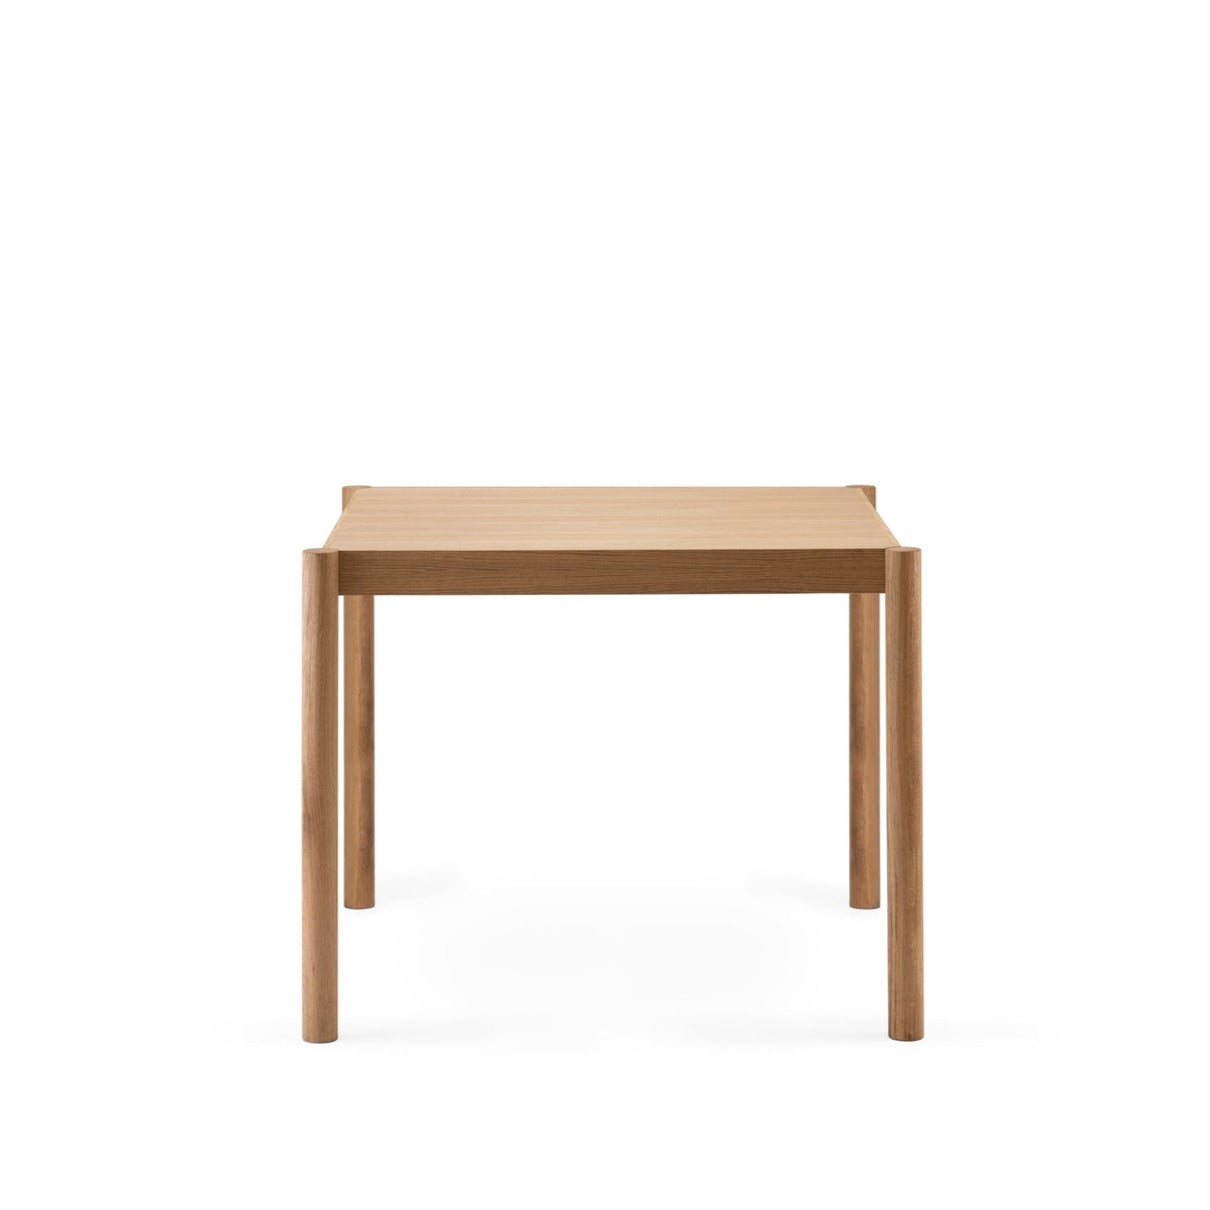 CITIZEN Dining Table-natural oak-small size